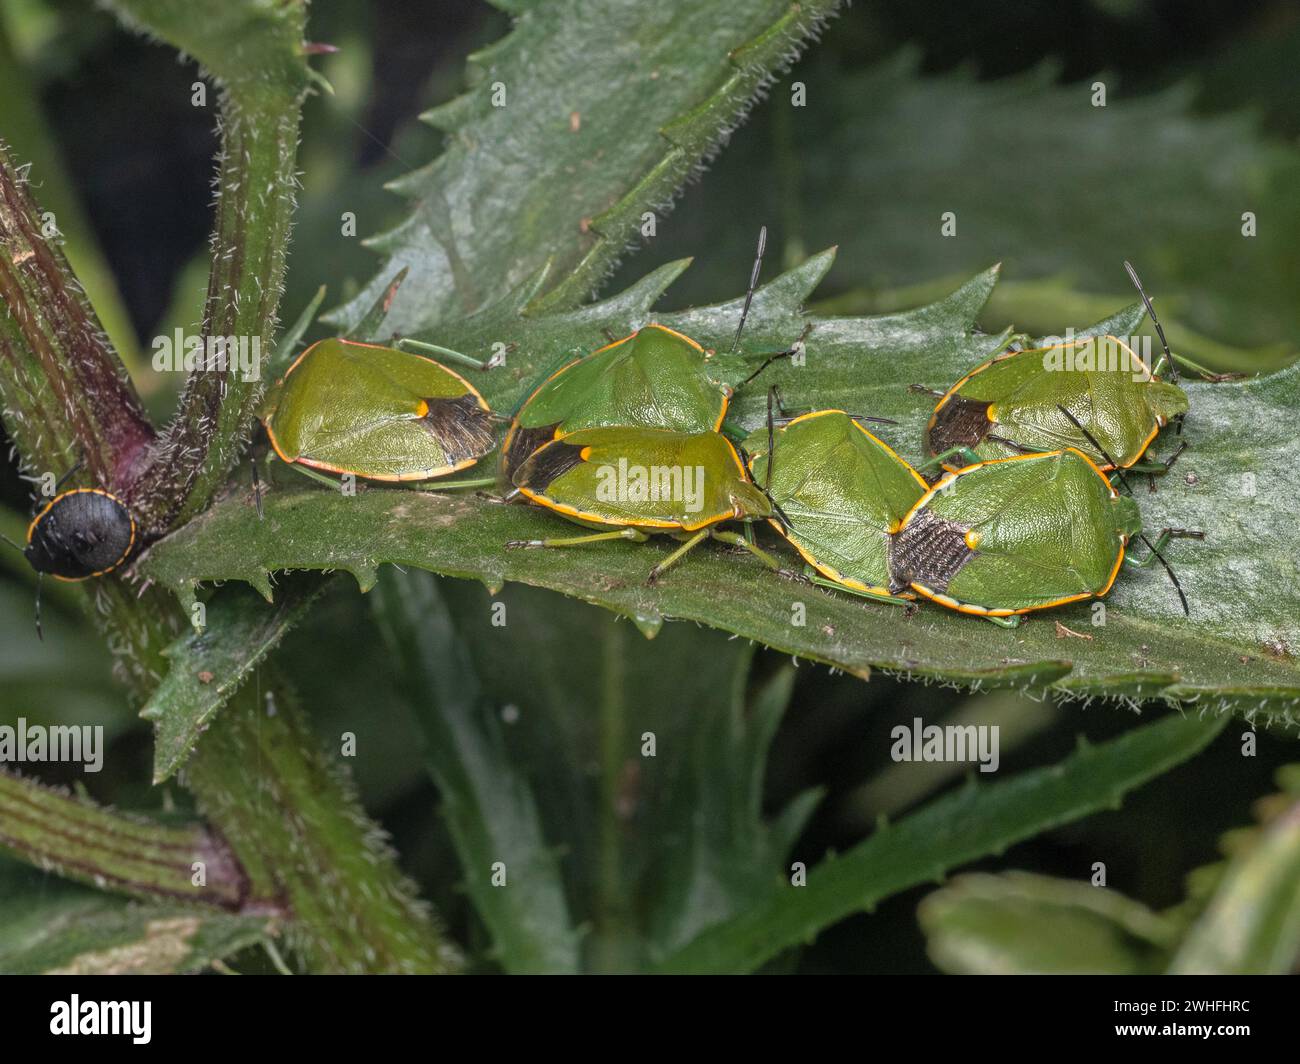 A group of adult stink bugs (Chlorochroa ligata), and one nymph, clustered together on a plant Stock Photo